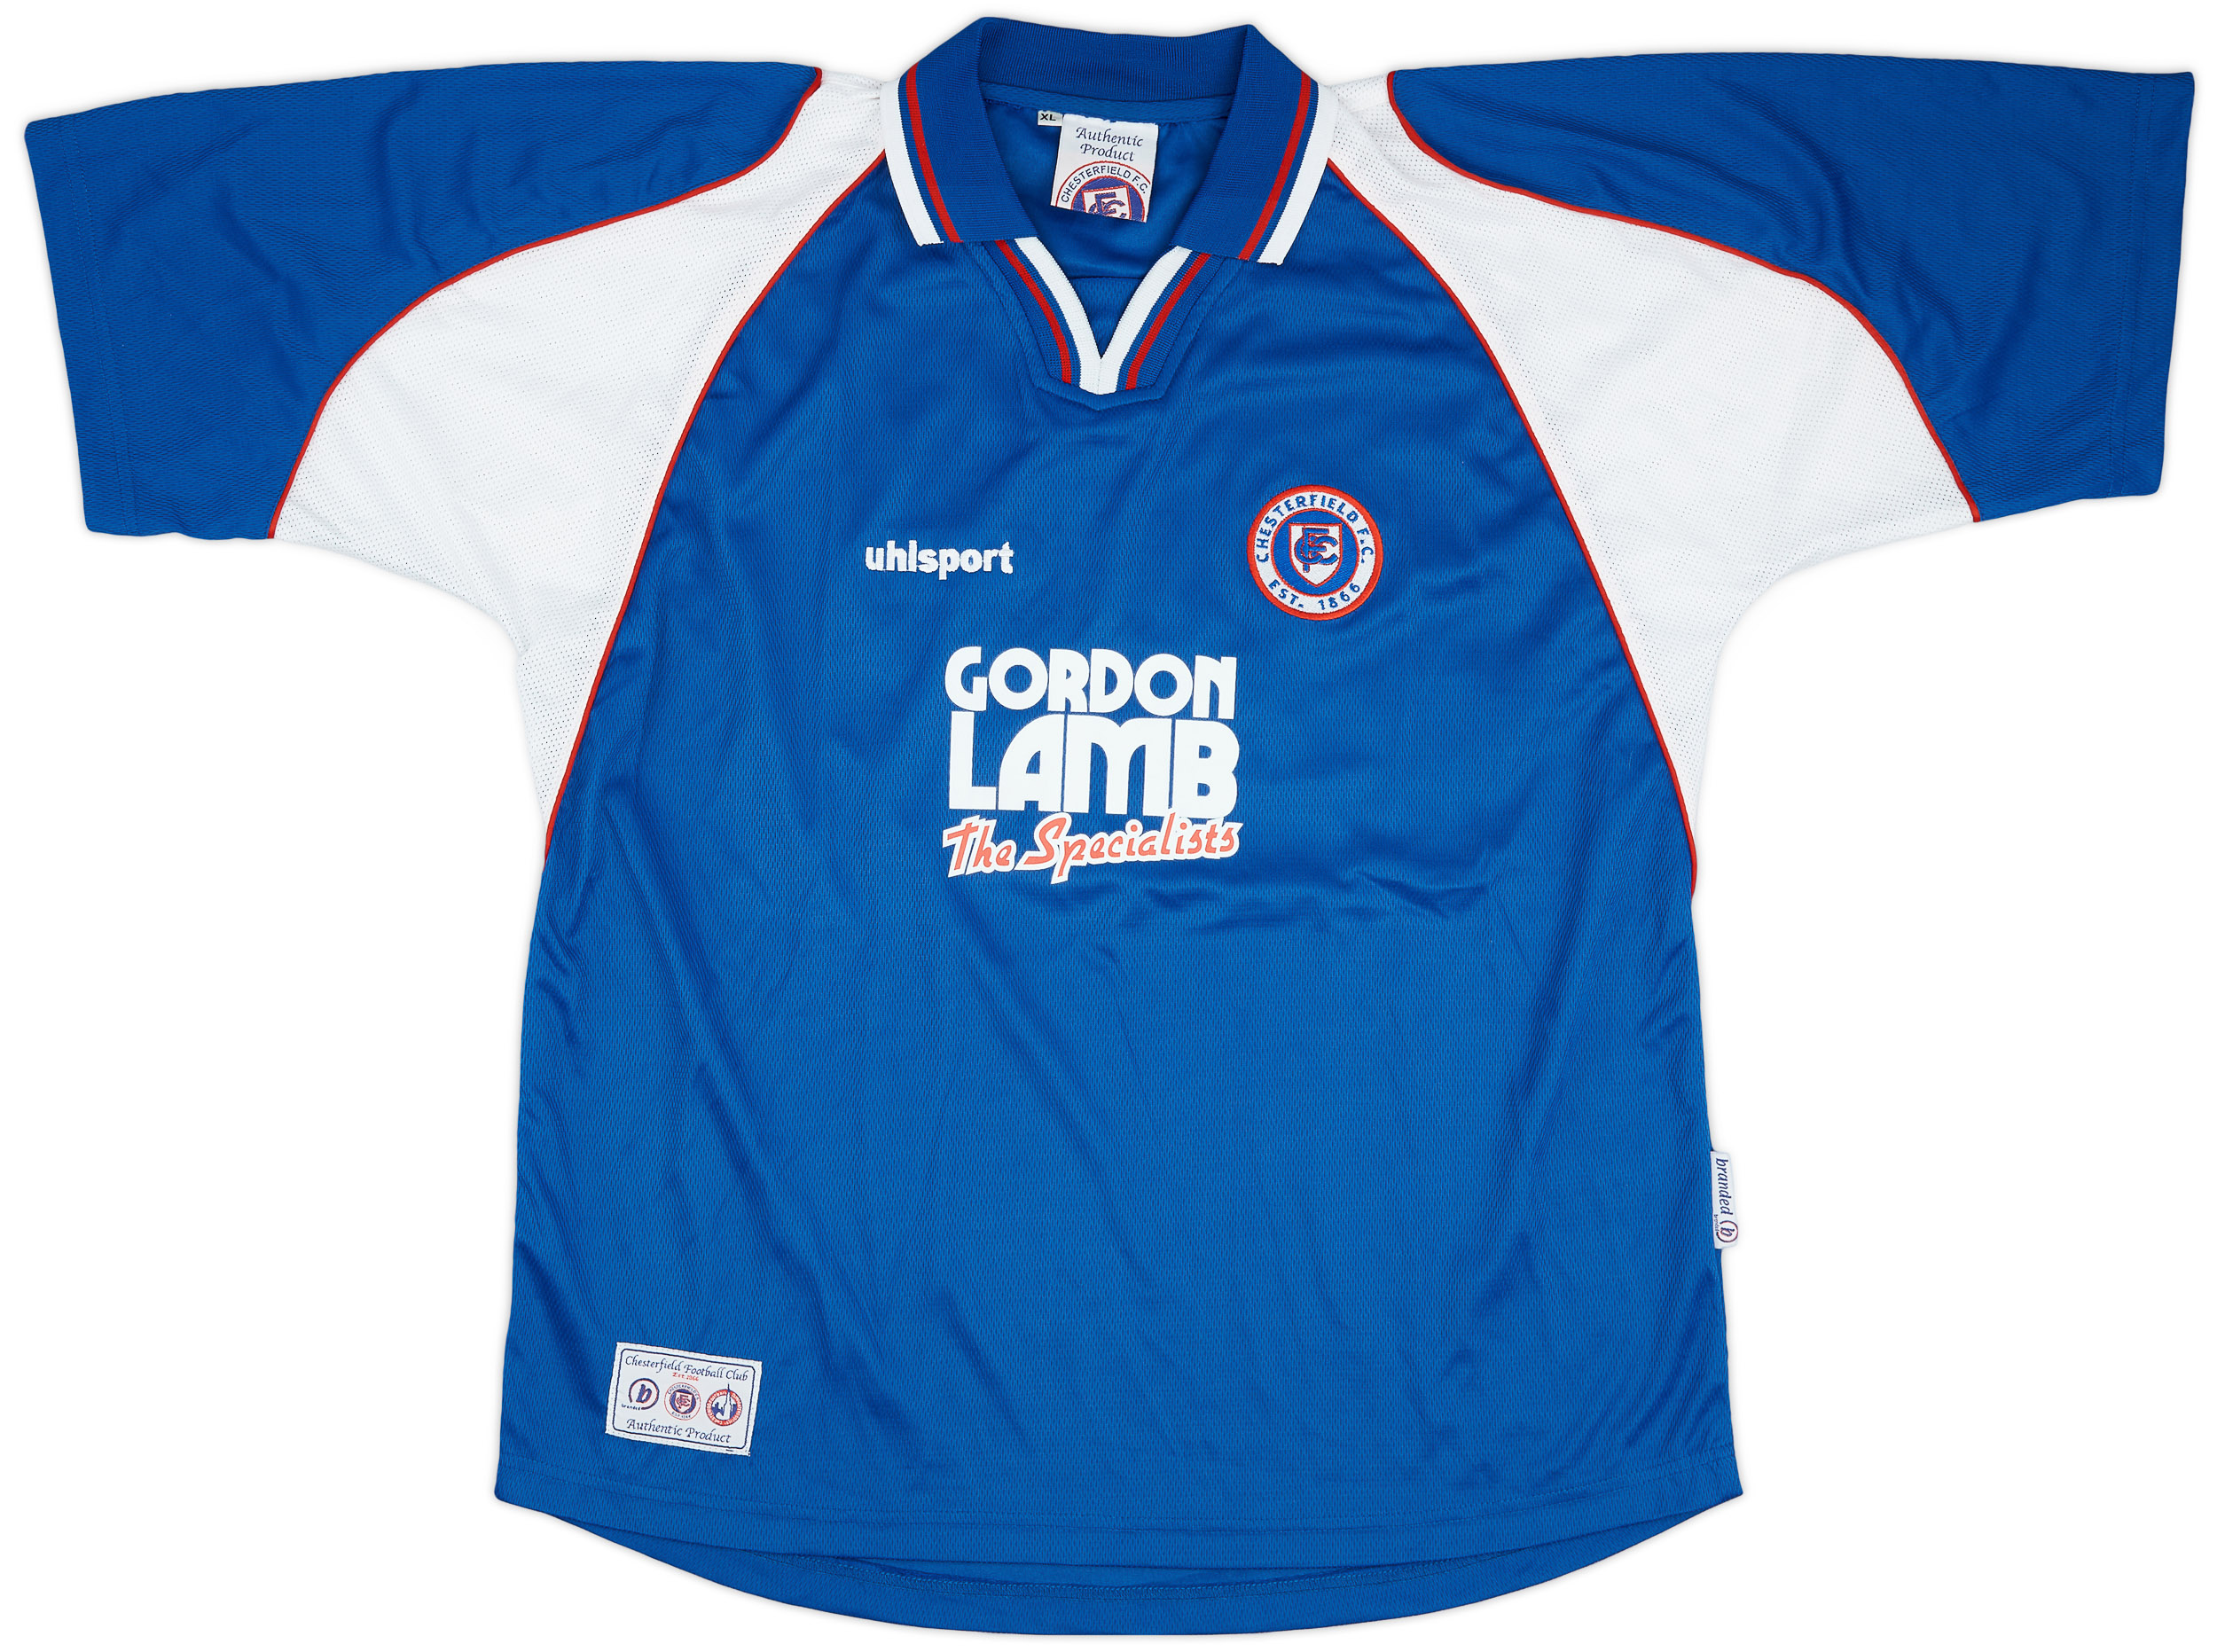 2003-04 Chesterfield Home Shirt - 9/10 - ()